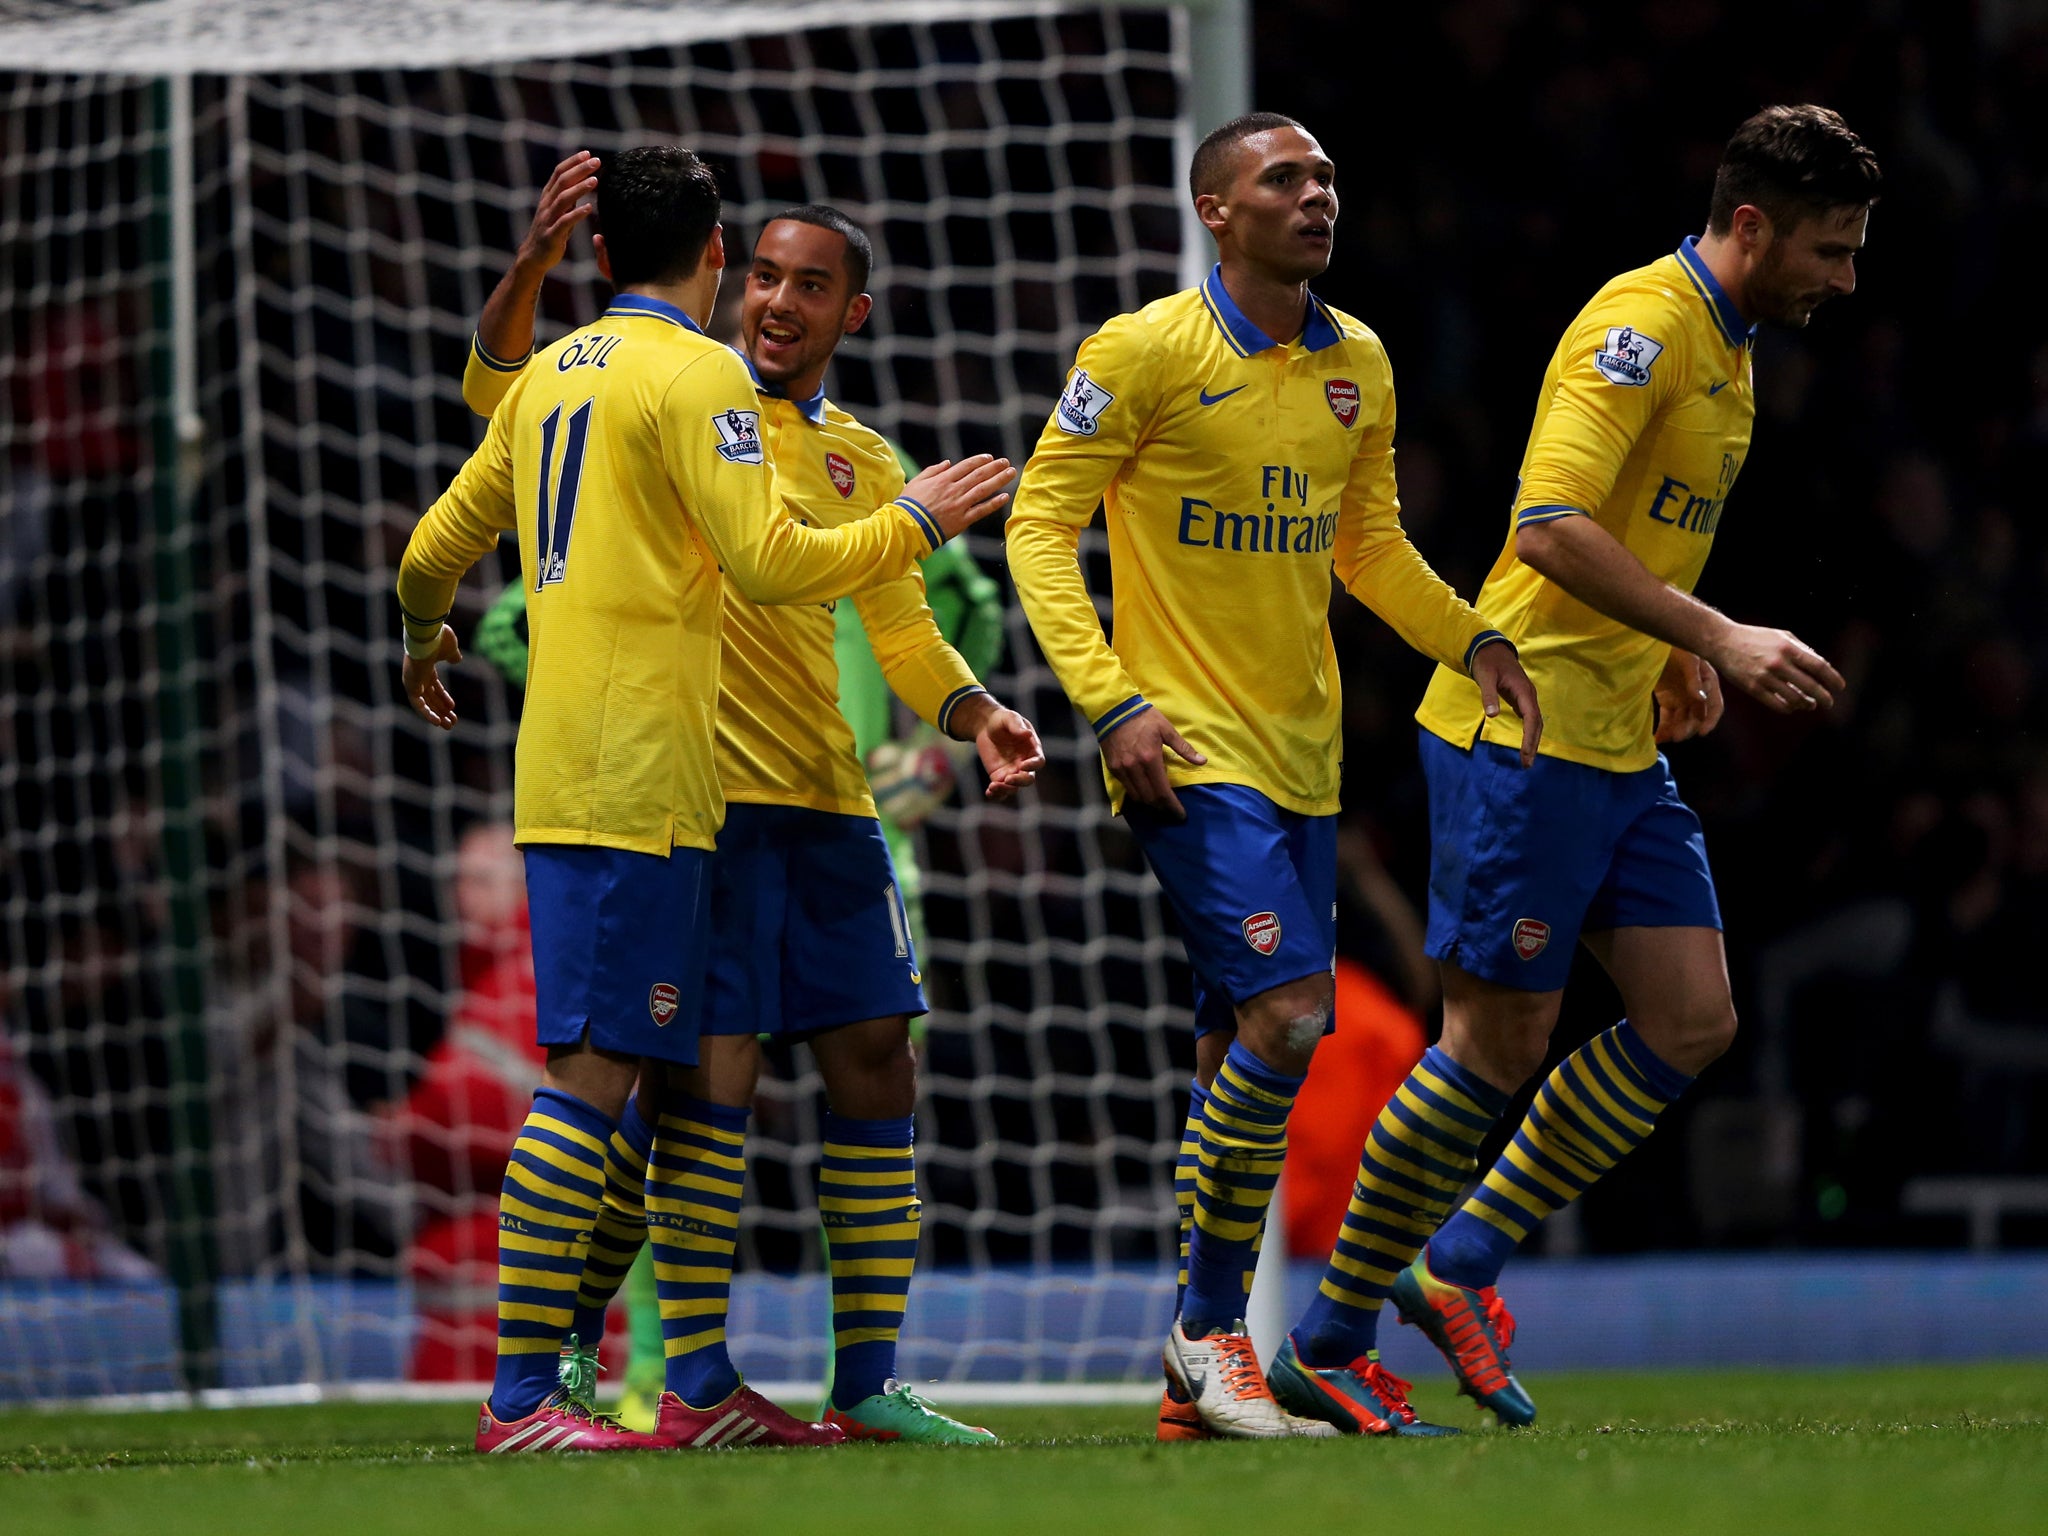 Theo Walcott celebrates after scoring for Arsenal in their match against West Ham